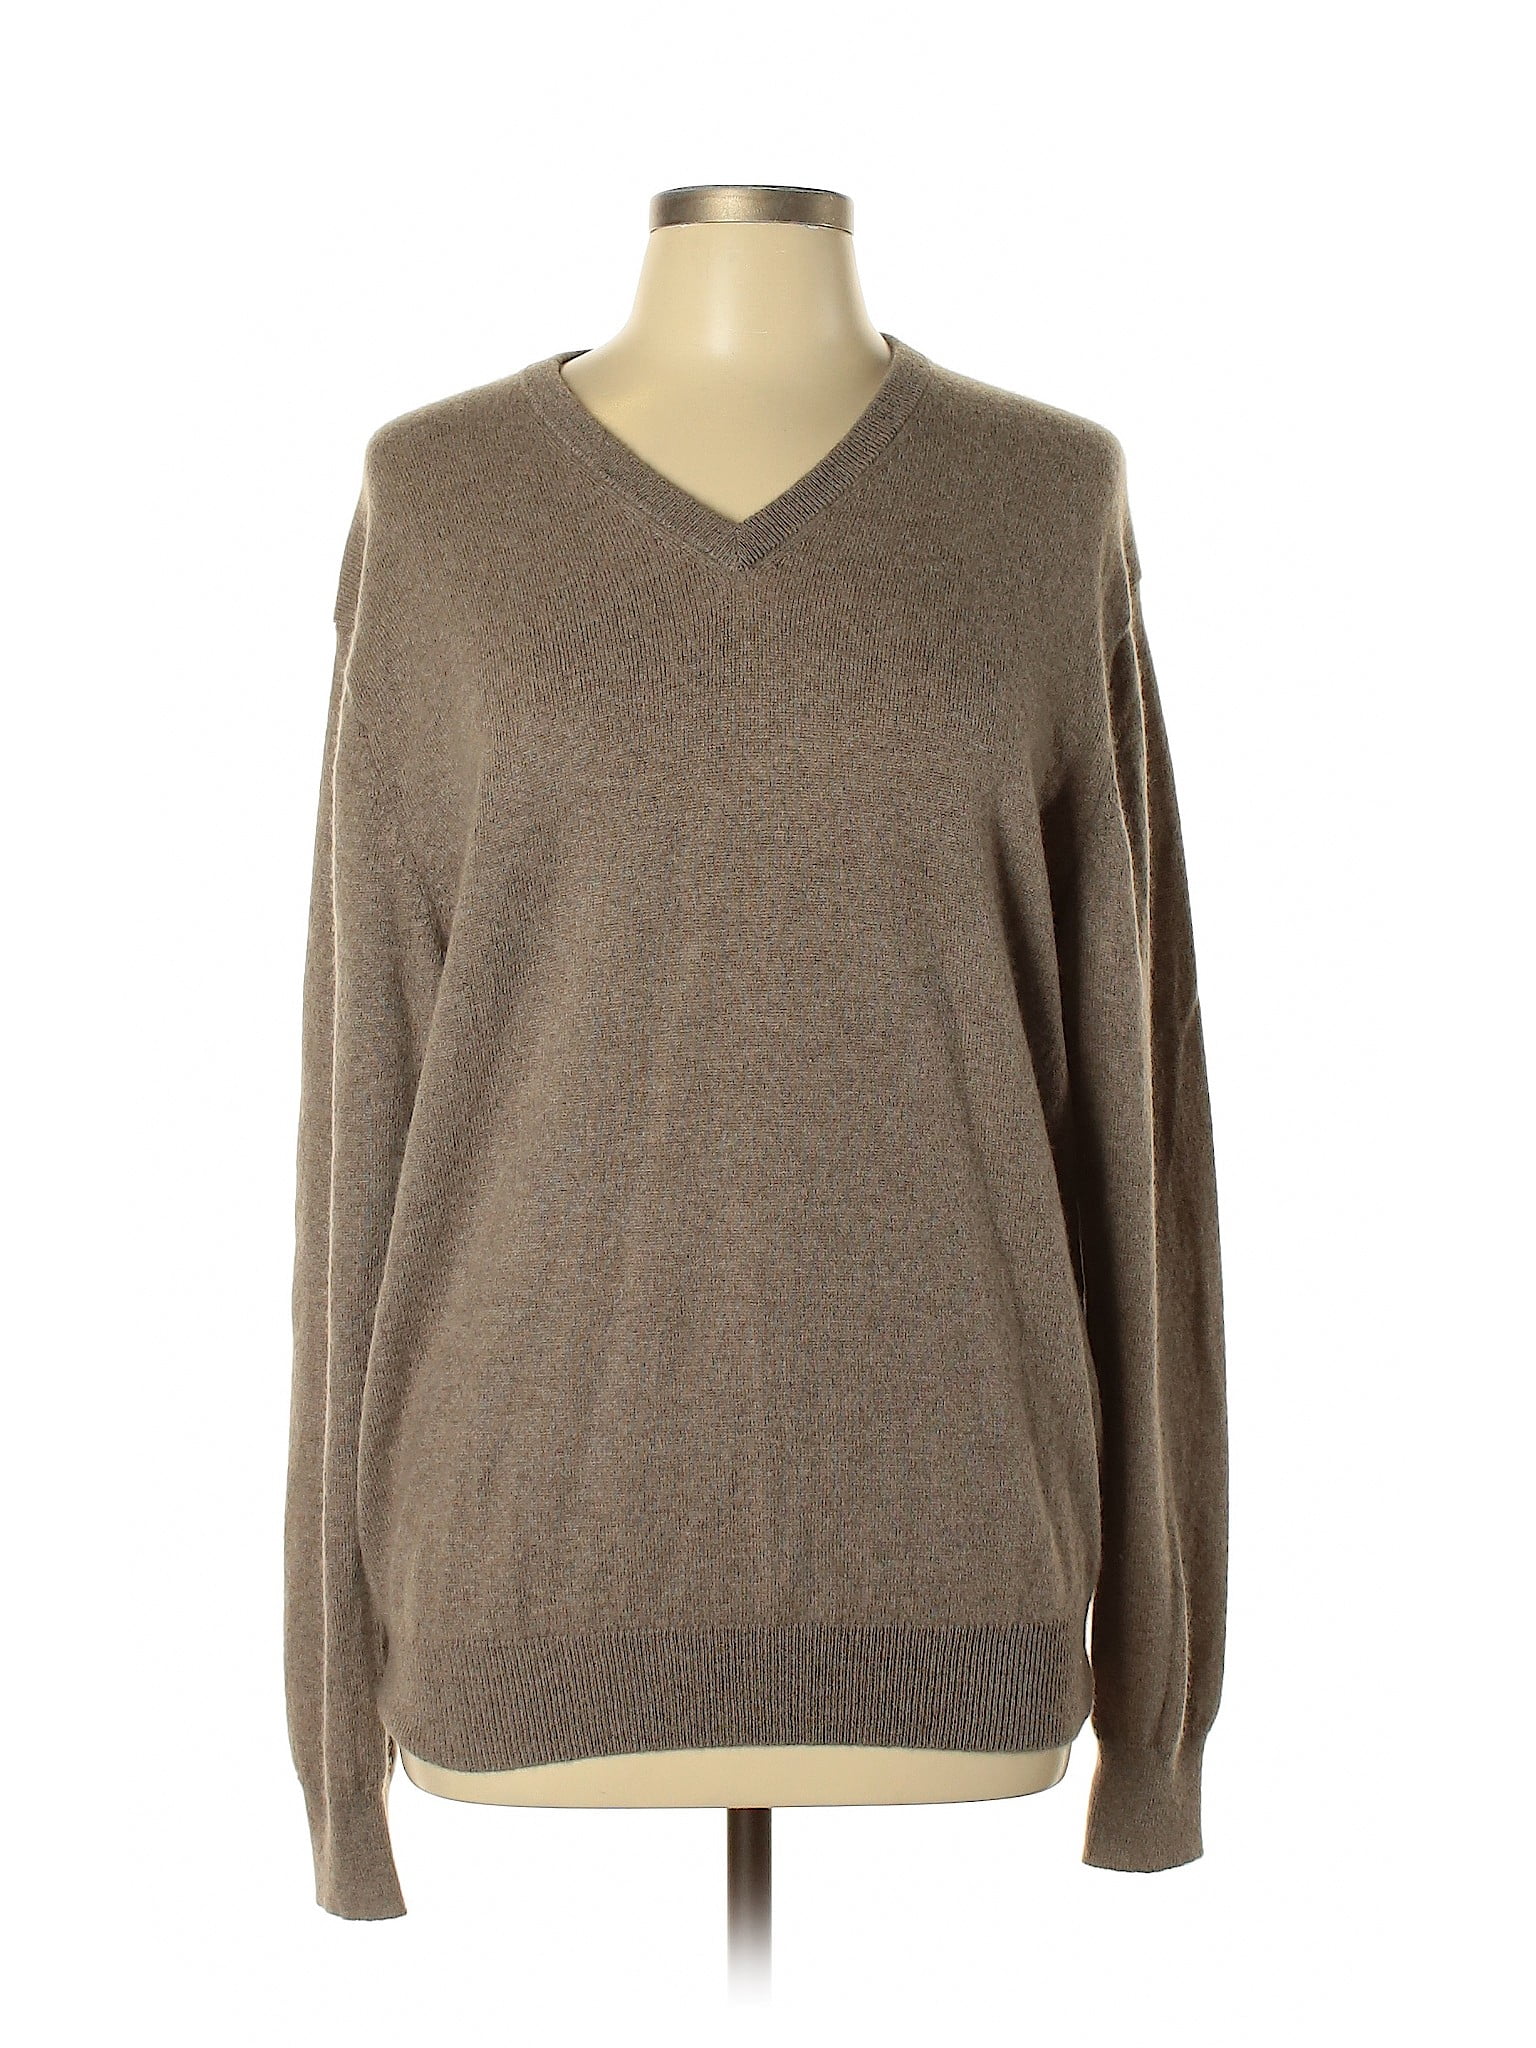 Jos. A. Bank - Pre-Owned Jos. A. Bank Women's Size L Cashmere Pullover ...